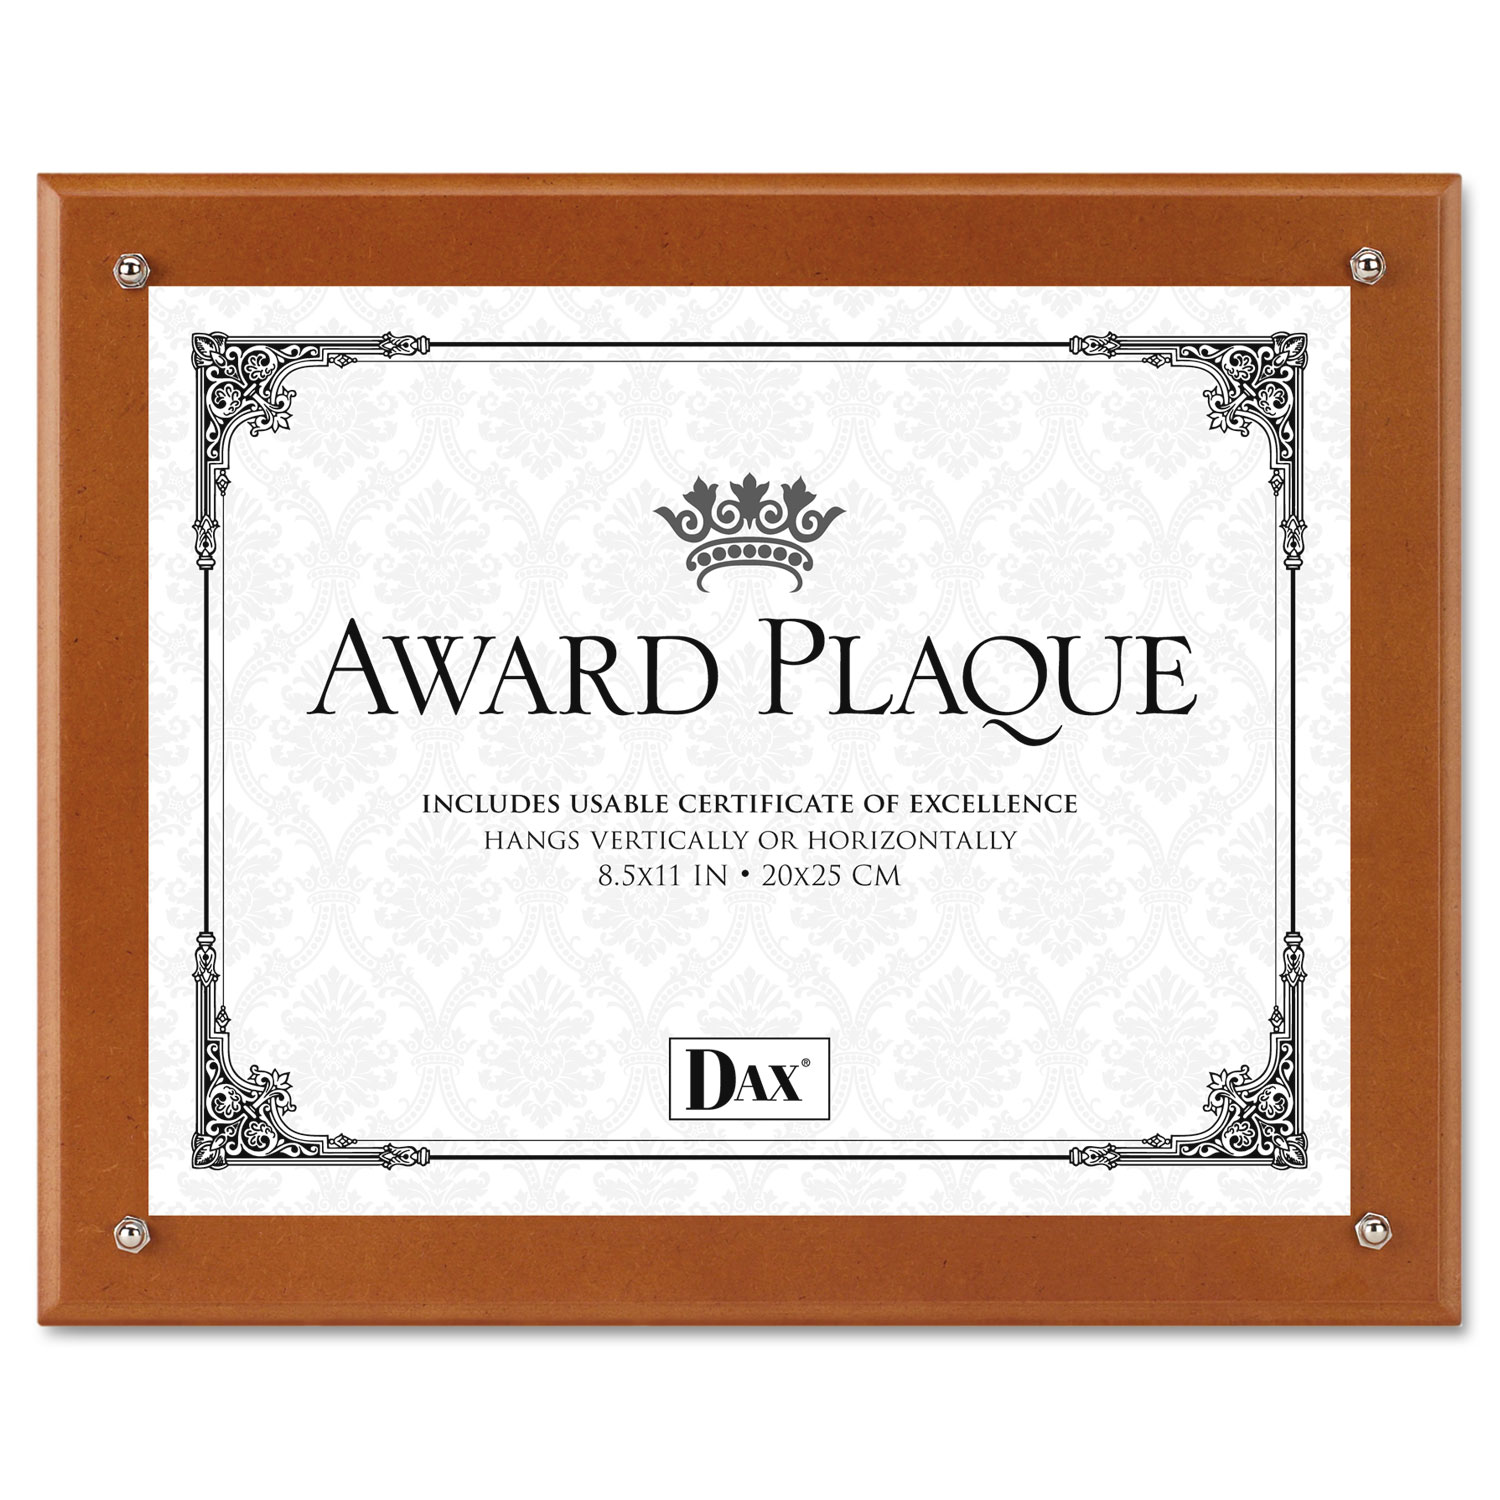 Plaque-In-An-Instant Kit w/Certs & Mats, Wood/Acrylic, Up to 8 1/2 x 11, Walnut